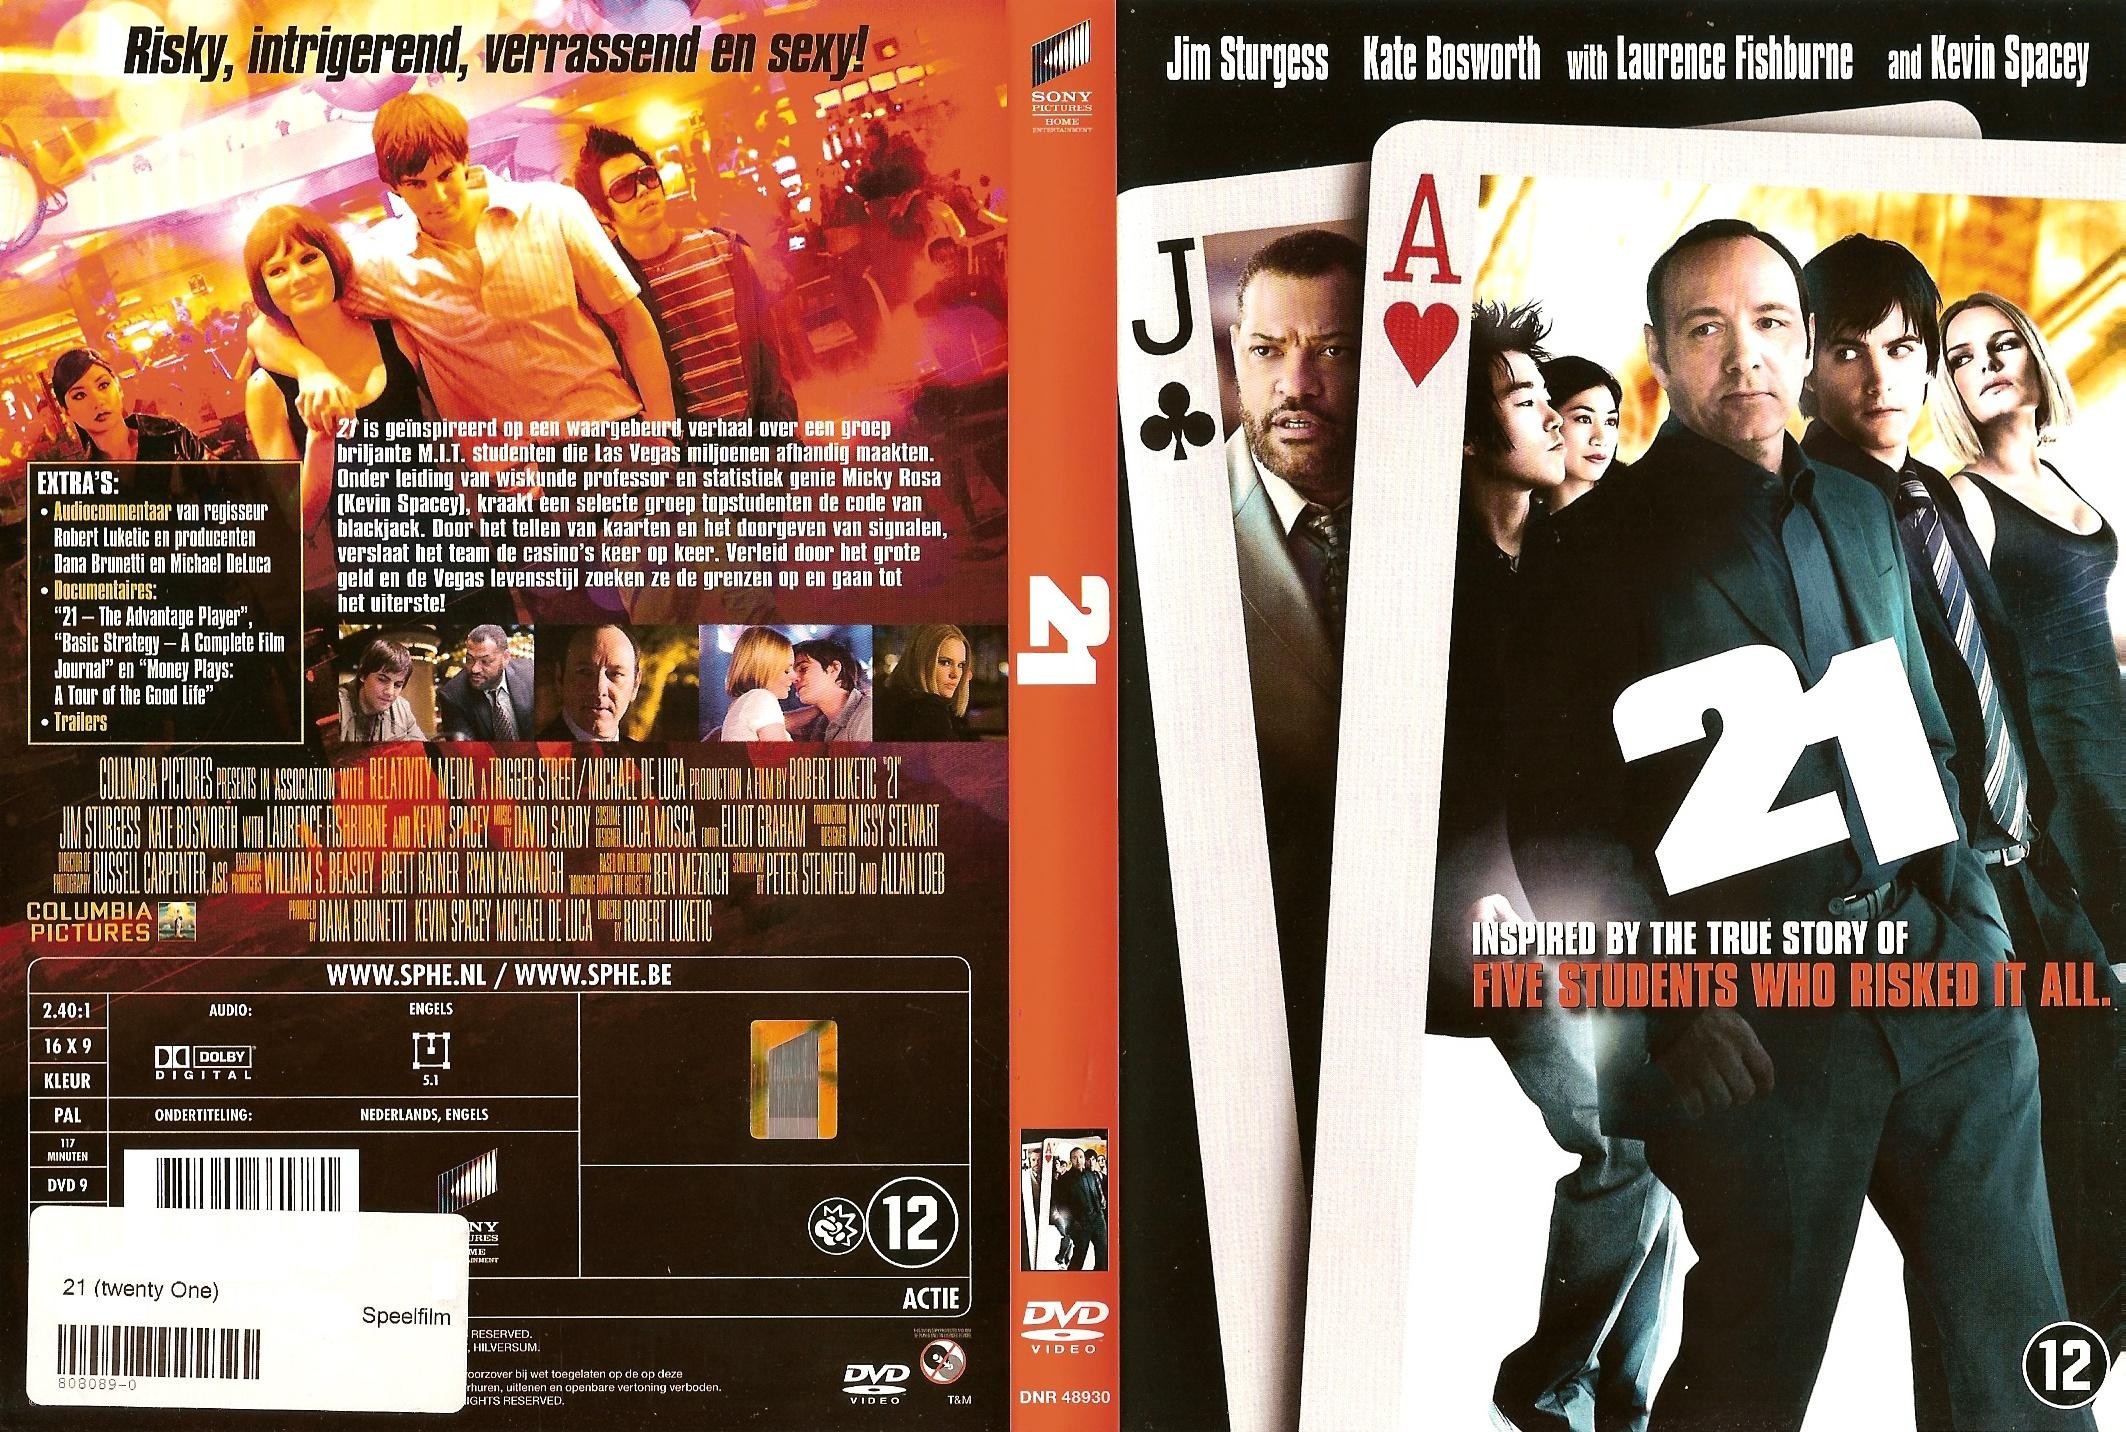 COVERS.BOX.SK ::: ps2 cover for final fight streetwise - high quality DVD /  Blueray / Movie